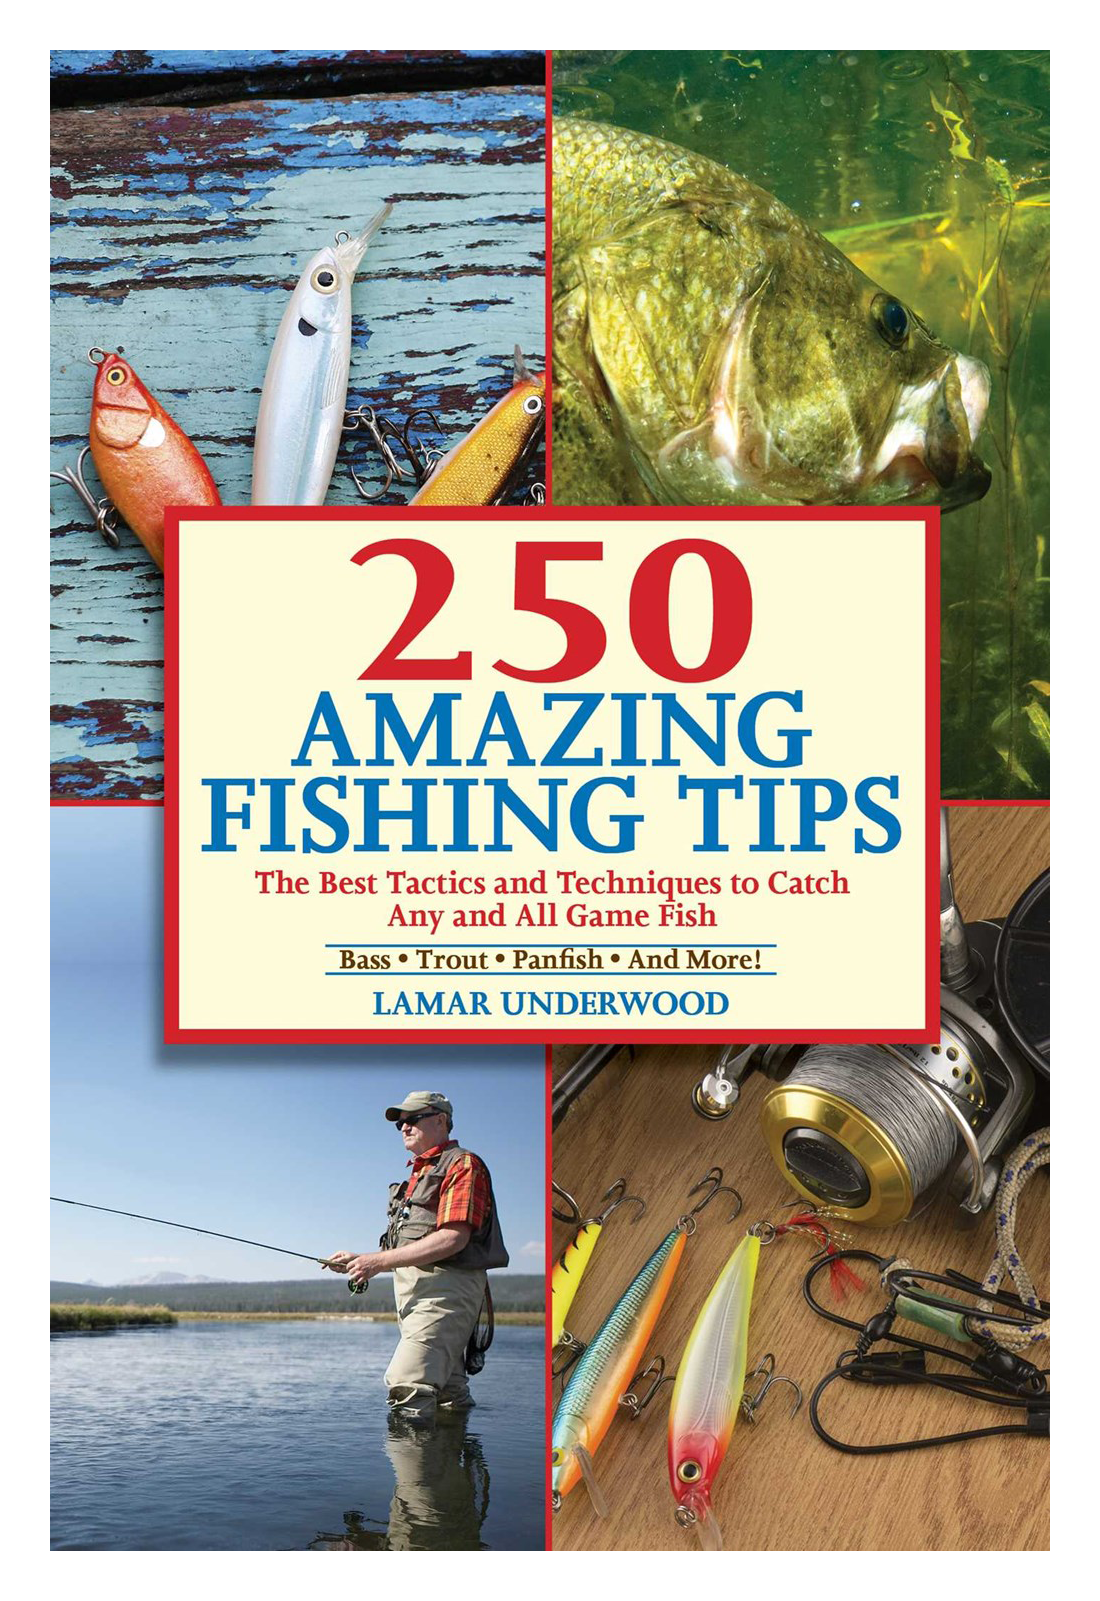 250 Amazing Fishing Tips: The Best Tactics and Techniques to Catch Any and  All Game Fish Book by Lamar Underwood